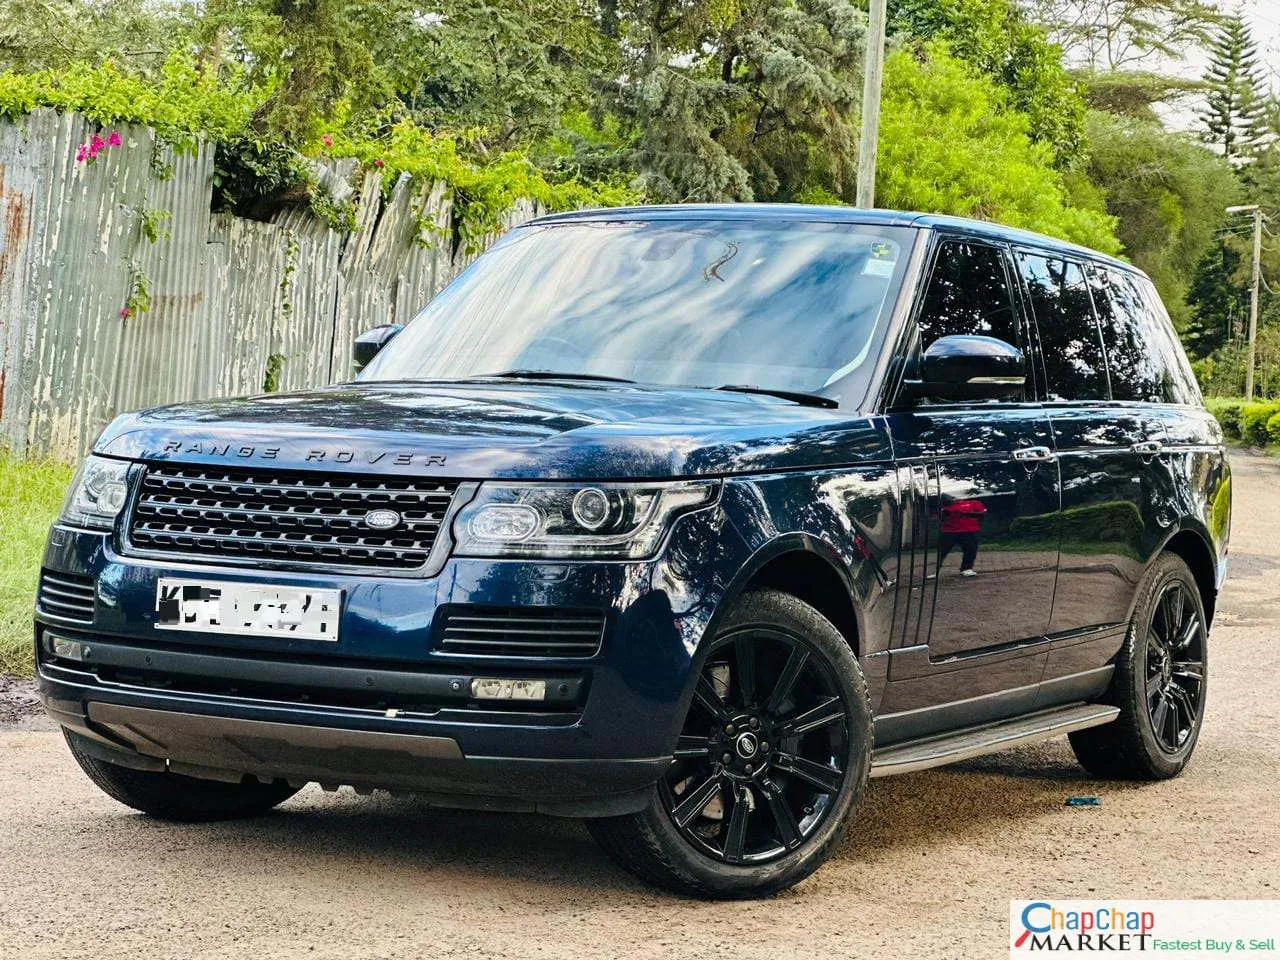 RANGE ROVER VOGUE AUTOBIOGRAPHY 4.4🔥 🔥 You Pay 40% DEPOSIT TRADE IN OK For sale in kenya exclusive HIRE PURCHASE INSTALLMENTS